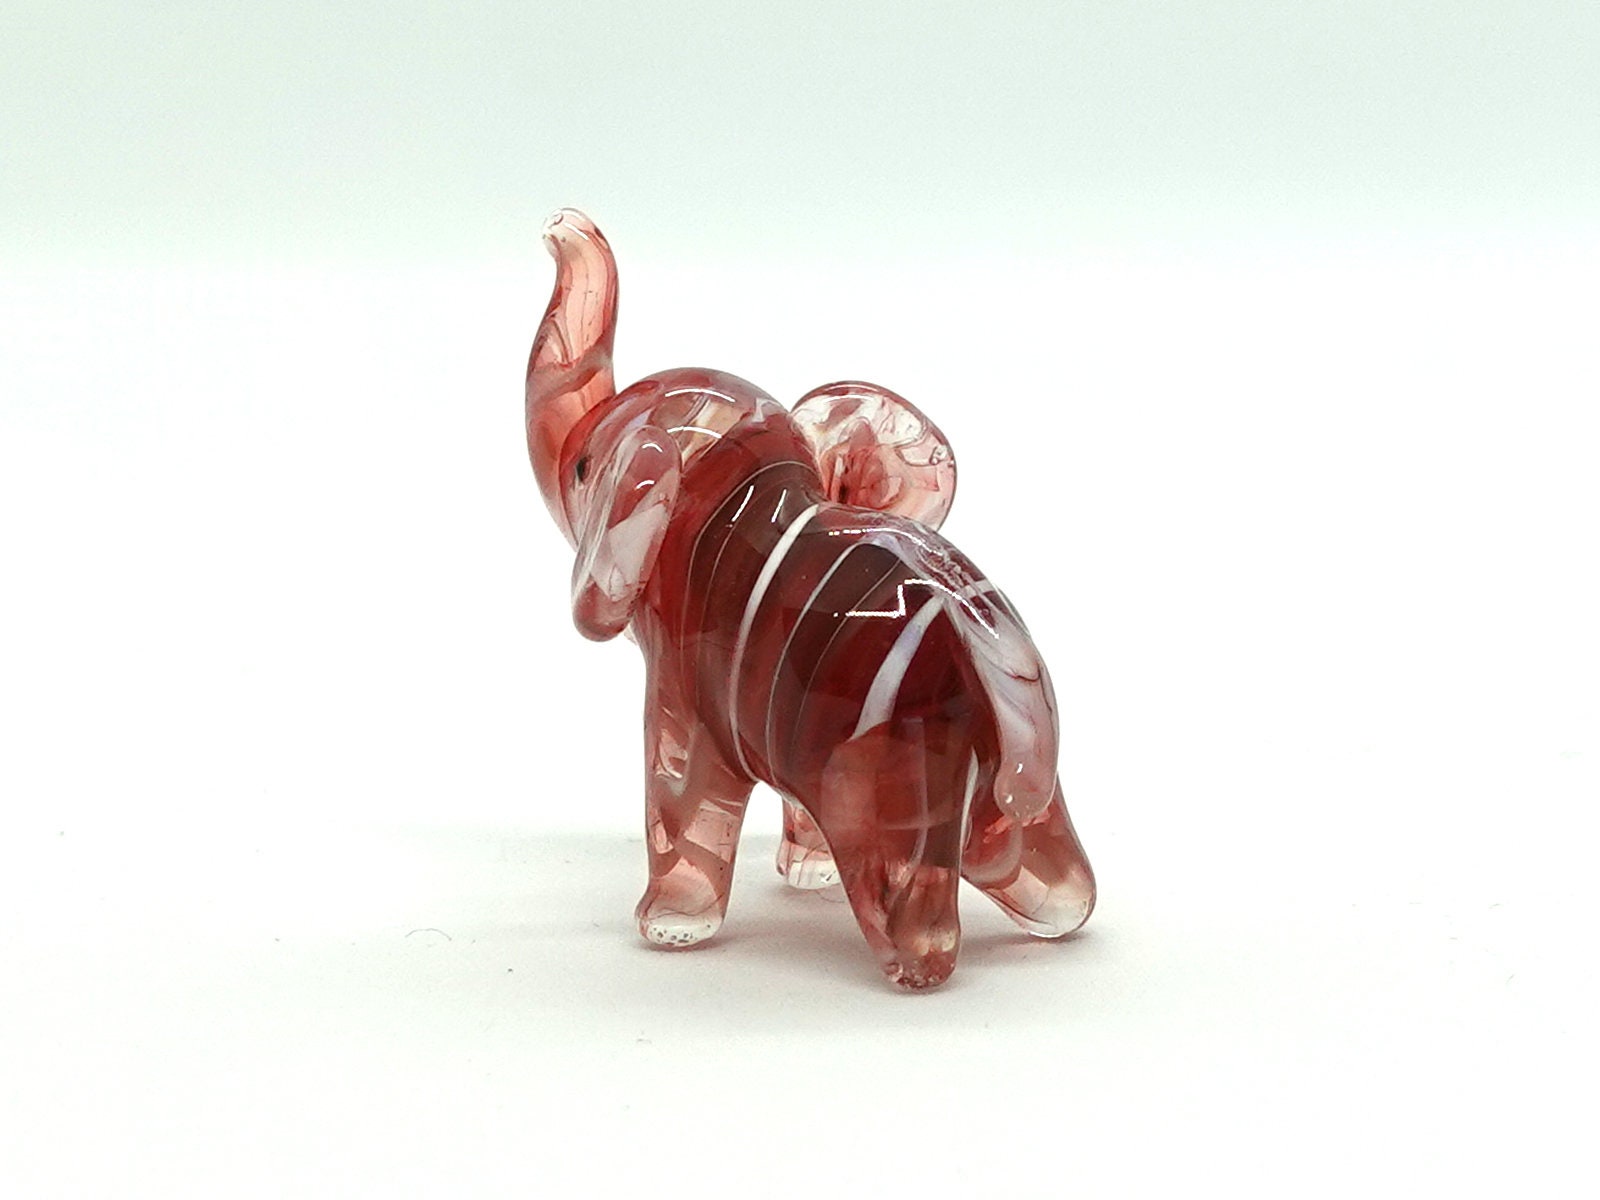 Elephant Figurines Animals Hand Painted Blown Glass Gold Trim Collectible MtC 